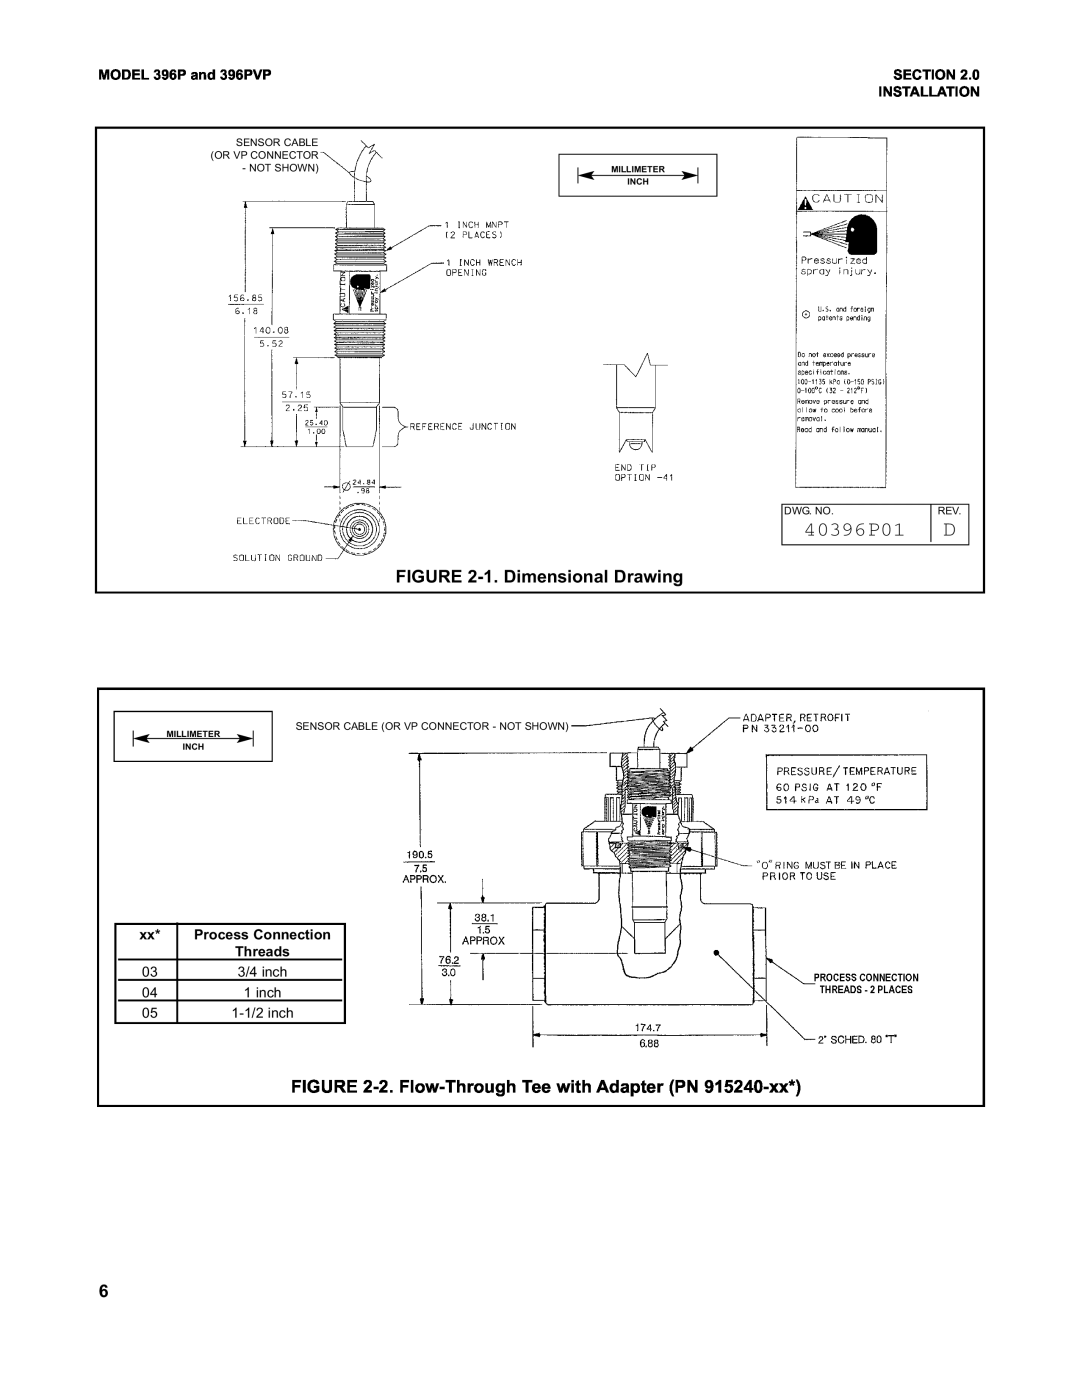 Emerson Process Management 40396P01, MODEL 396P and 396PVP, Section, Process Connection, Sensor Cable, Or Vp Connector 